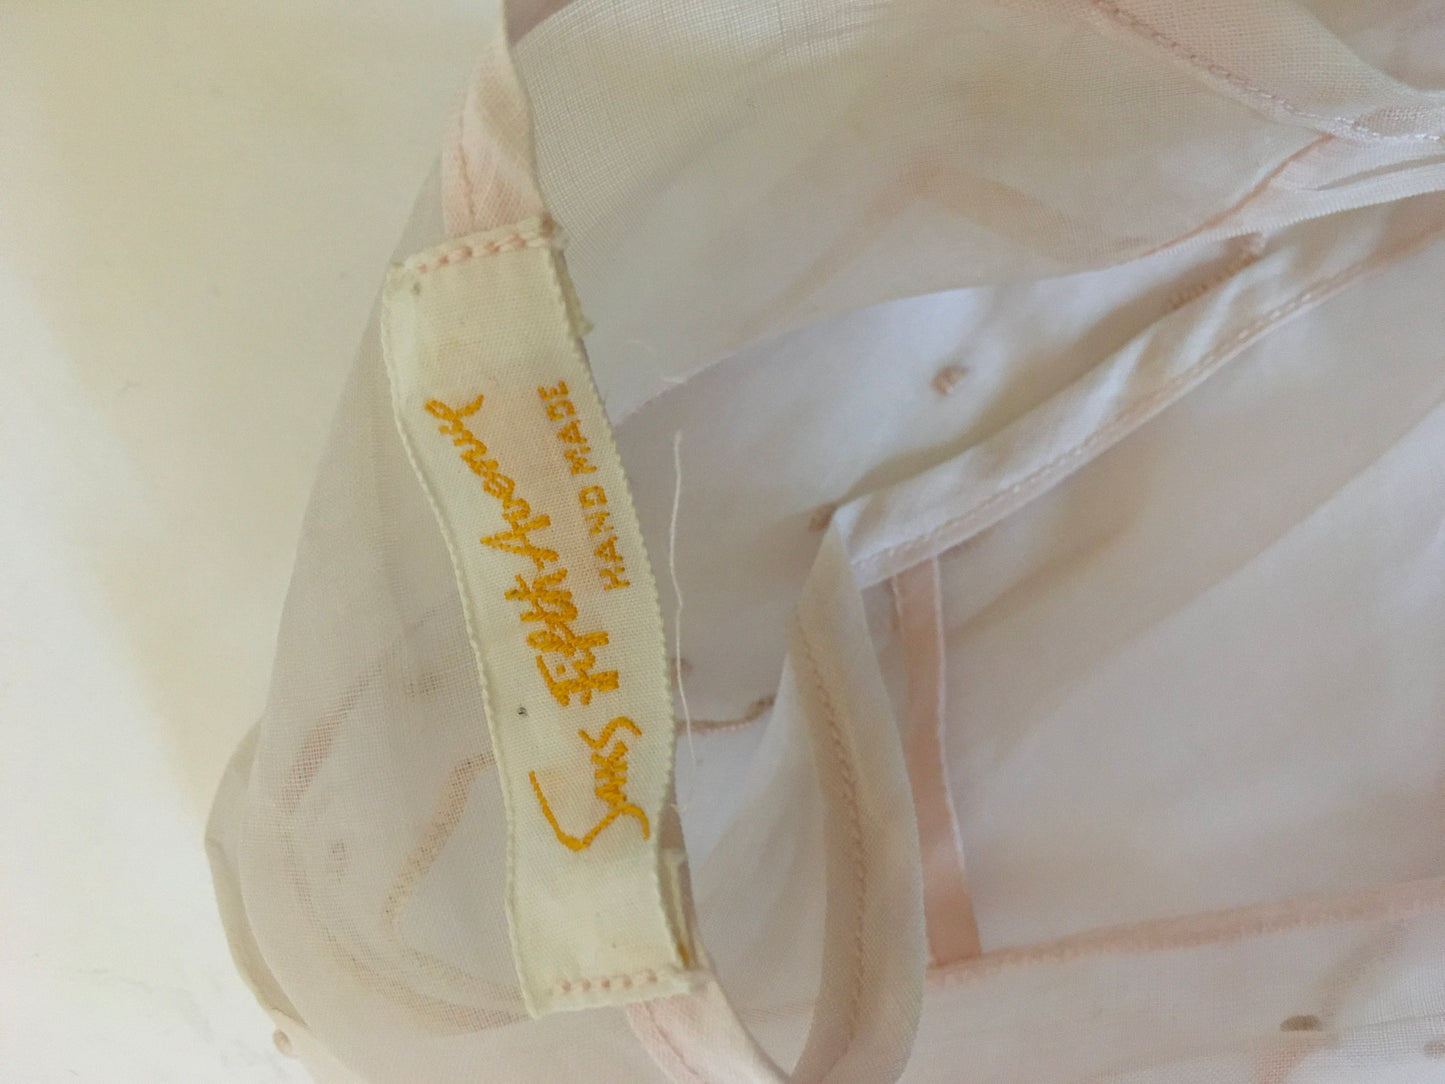 Original 1930’s Broderie Anglaise Dickie - By Saks Fifth Avenue in A Powdered Pink